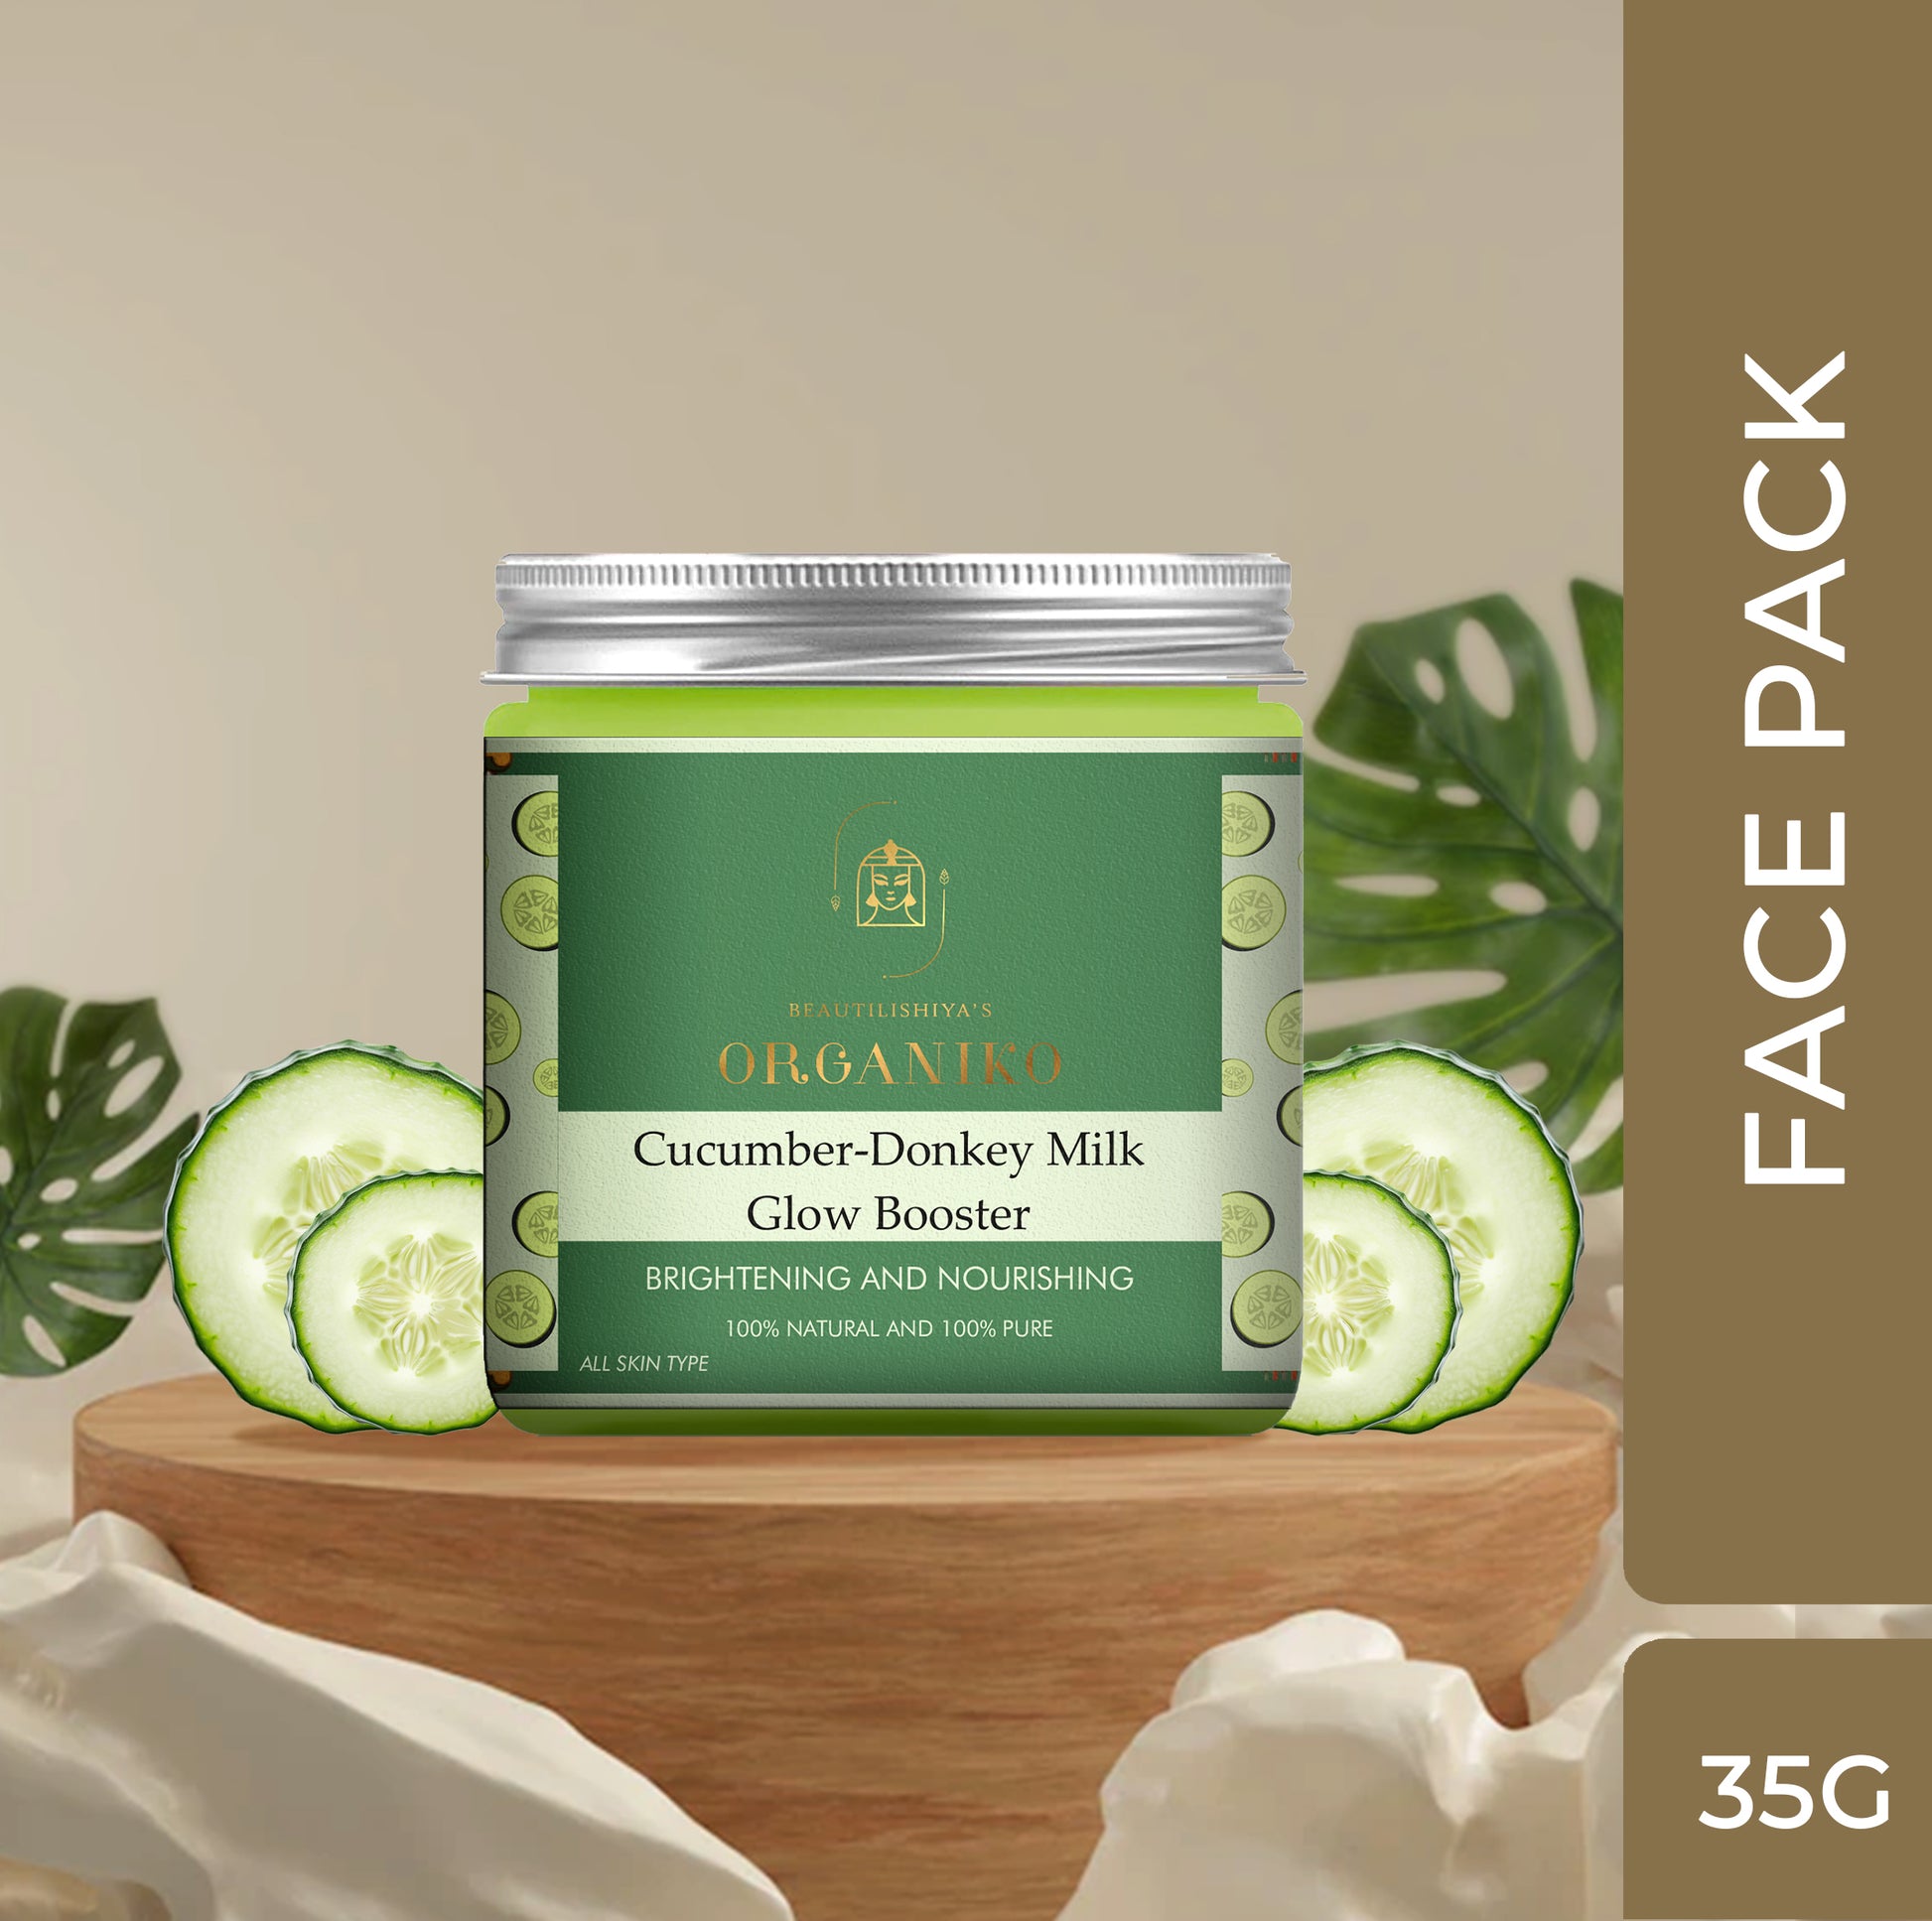 Cucumber-Donkey Milk Glow Booster_Face Pack_35gm